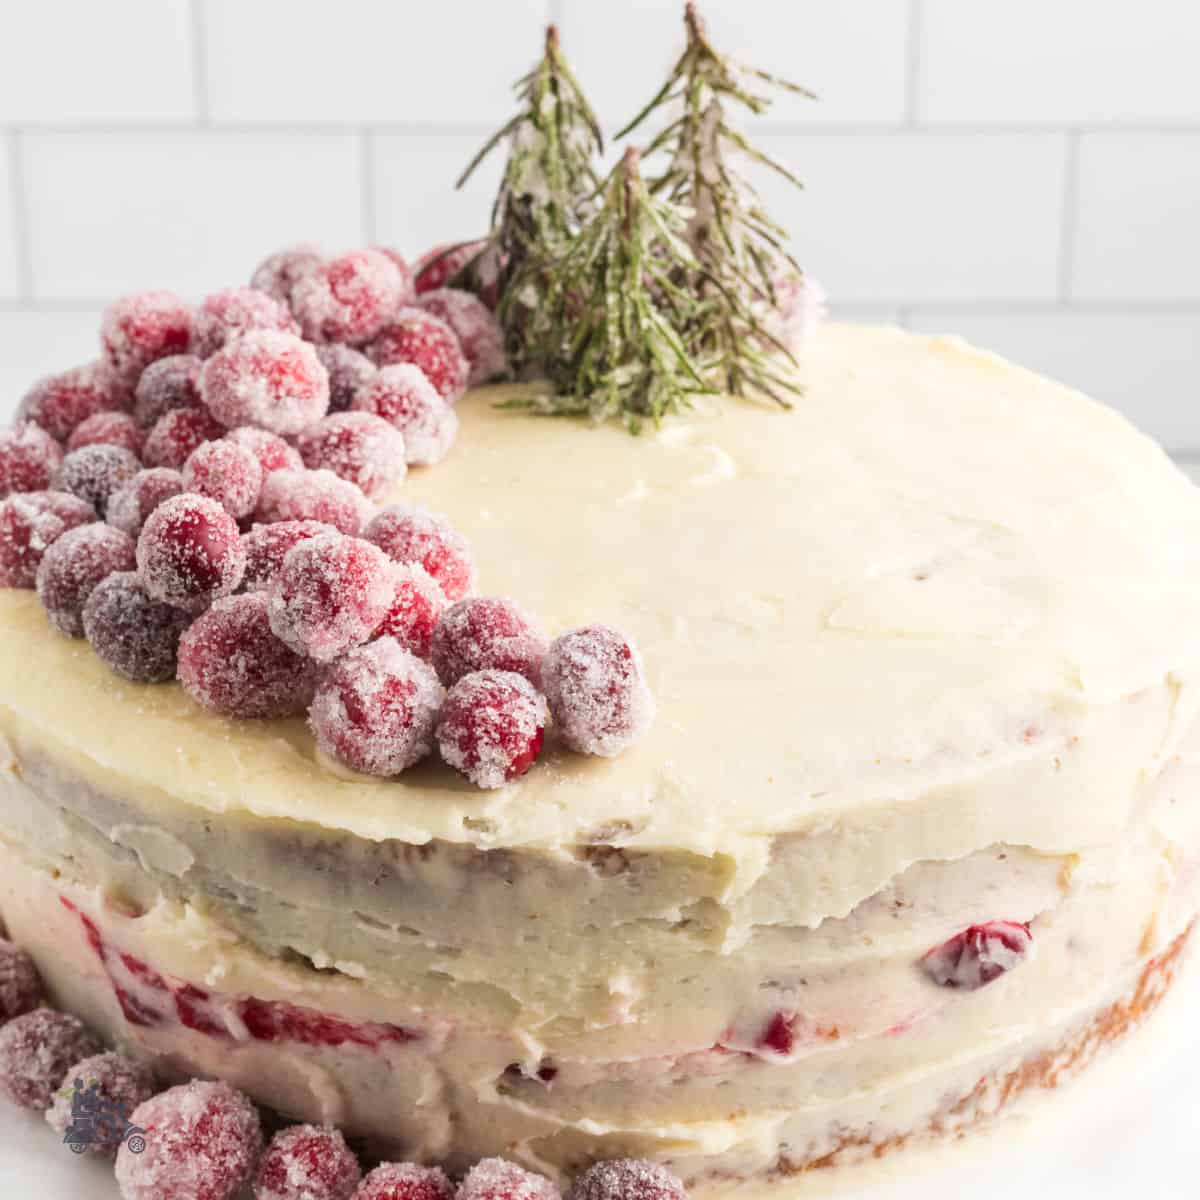 Cranberry cake recipe made with a white cake mix, fresh cranberries, mascarpone frosting, garnished with sugared cranberries and rosemary sprigs.